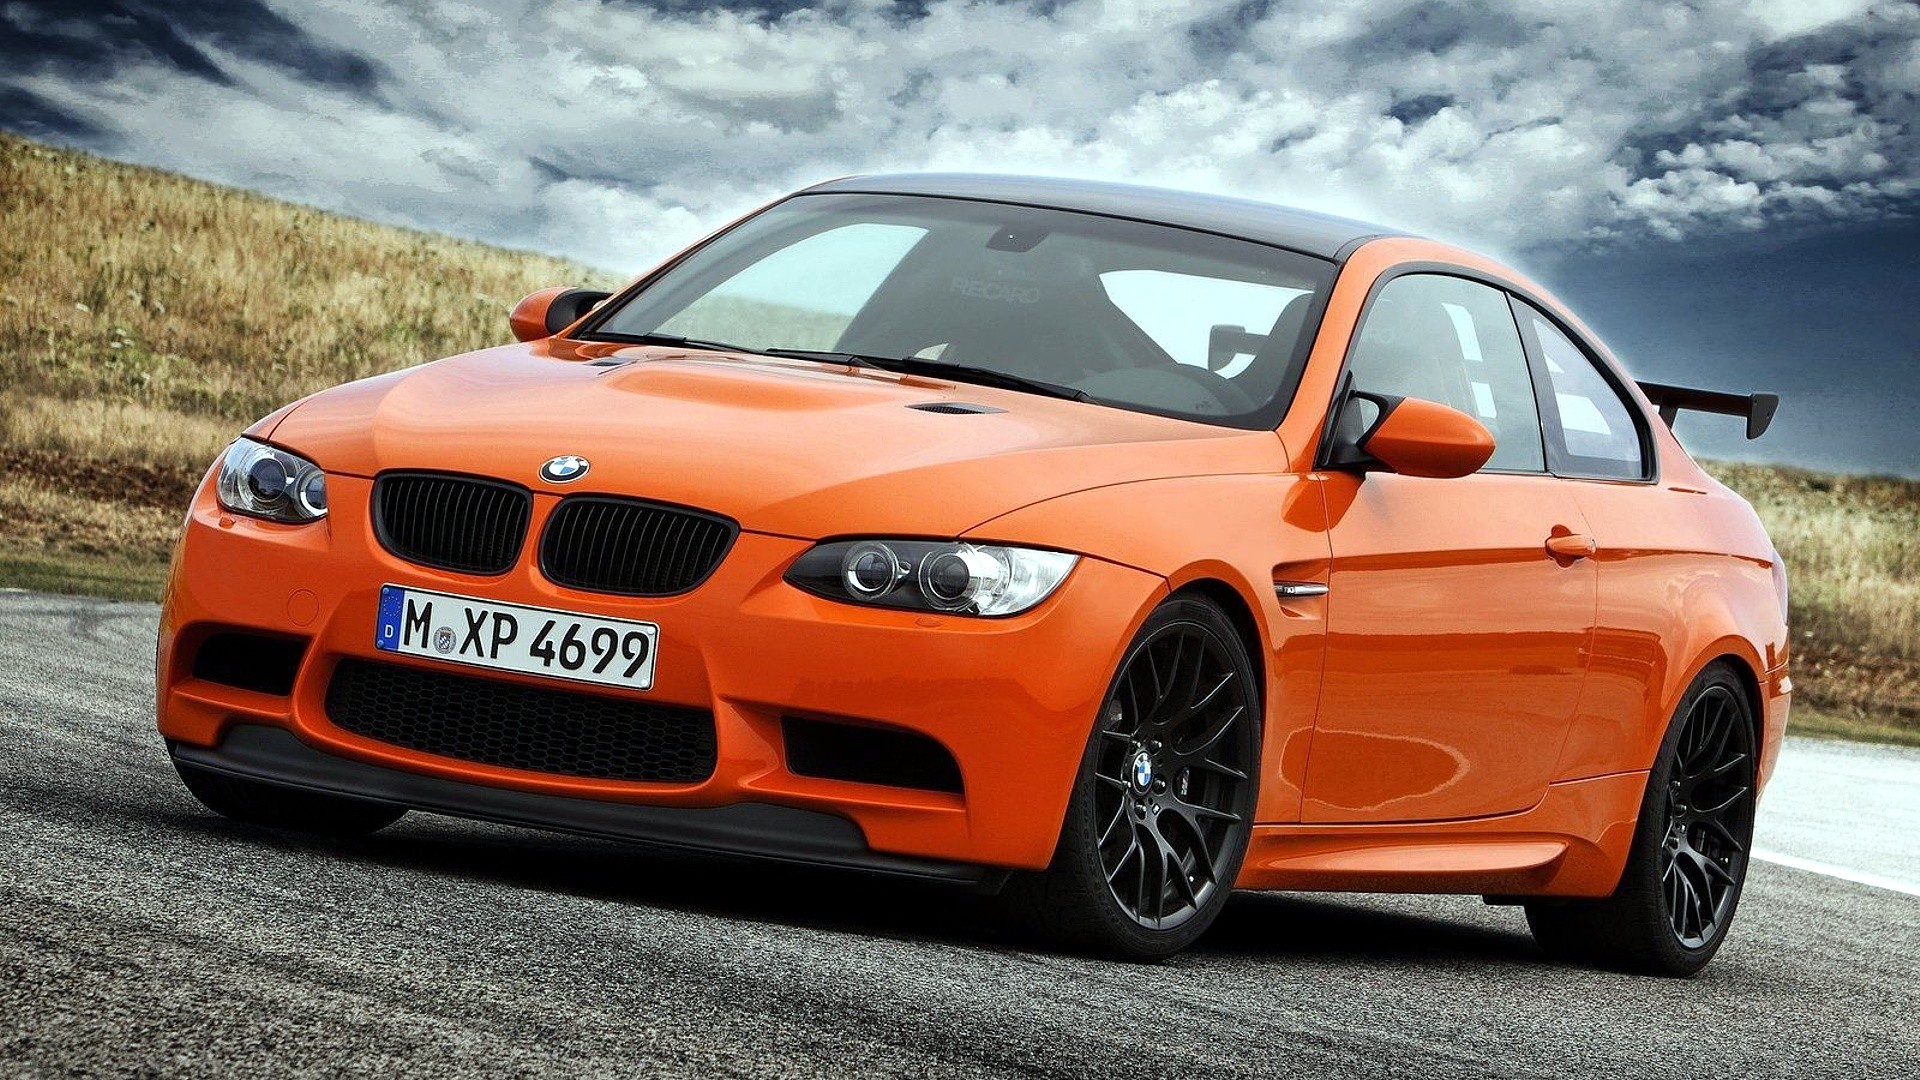 1920x1080 Bmw orange, hd wallpapers from -> www.HotSzots.eu | Vroom Vroom CARS |  Pinterest | BMW, Cars and BMW M3